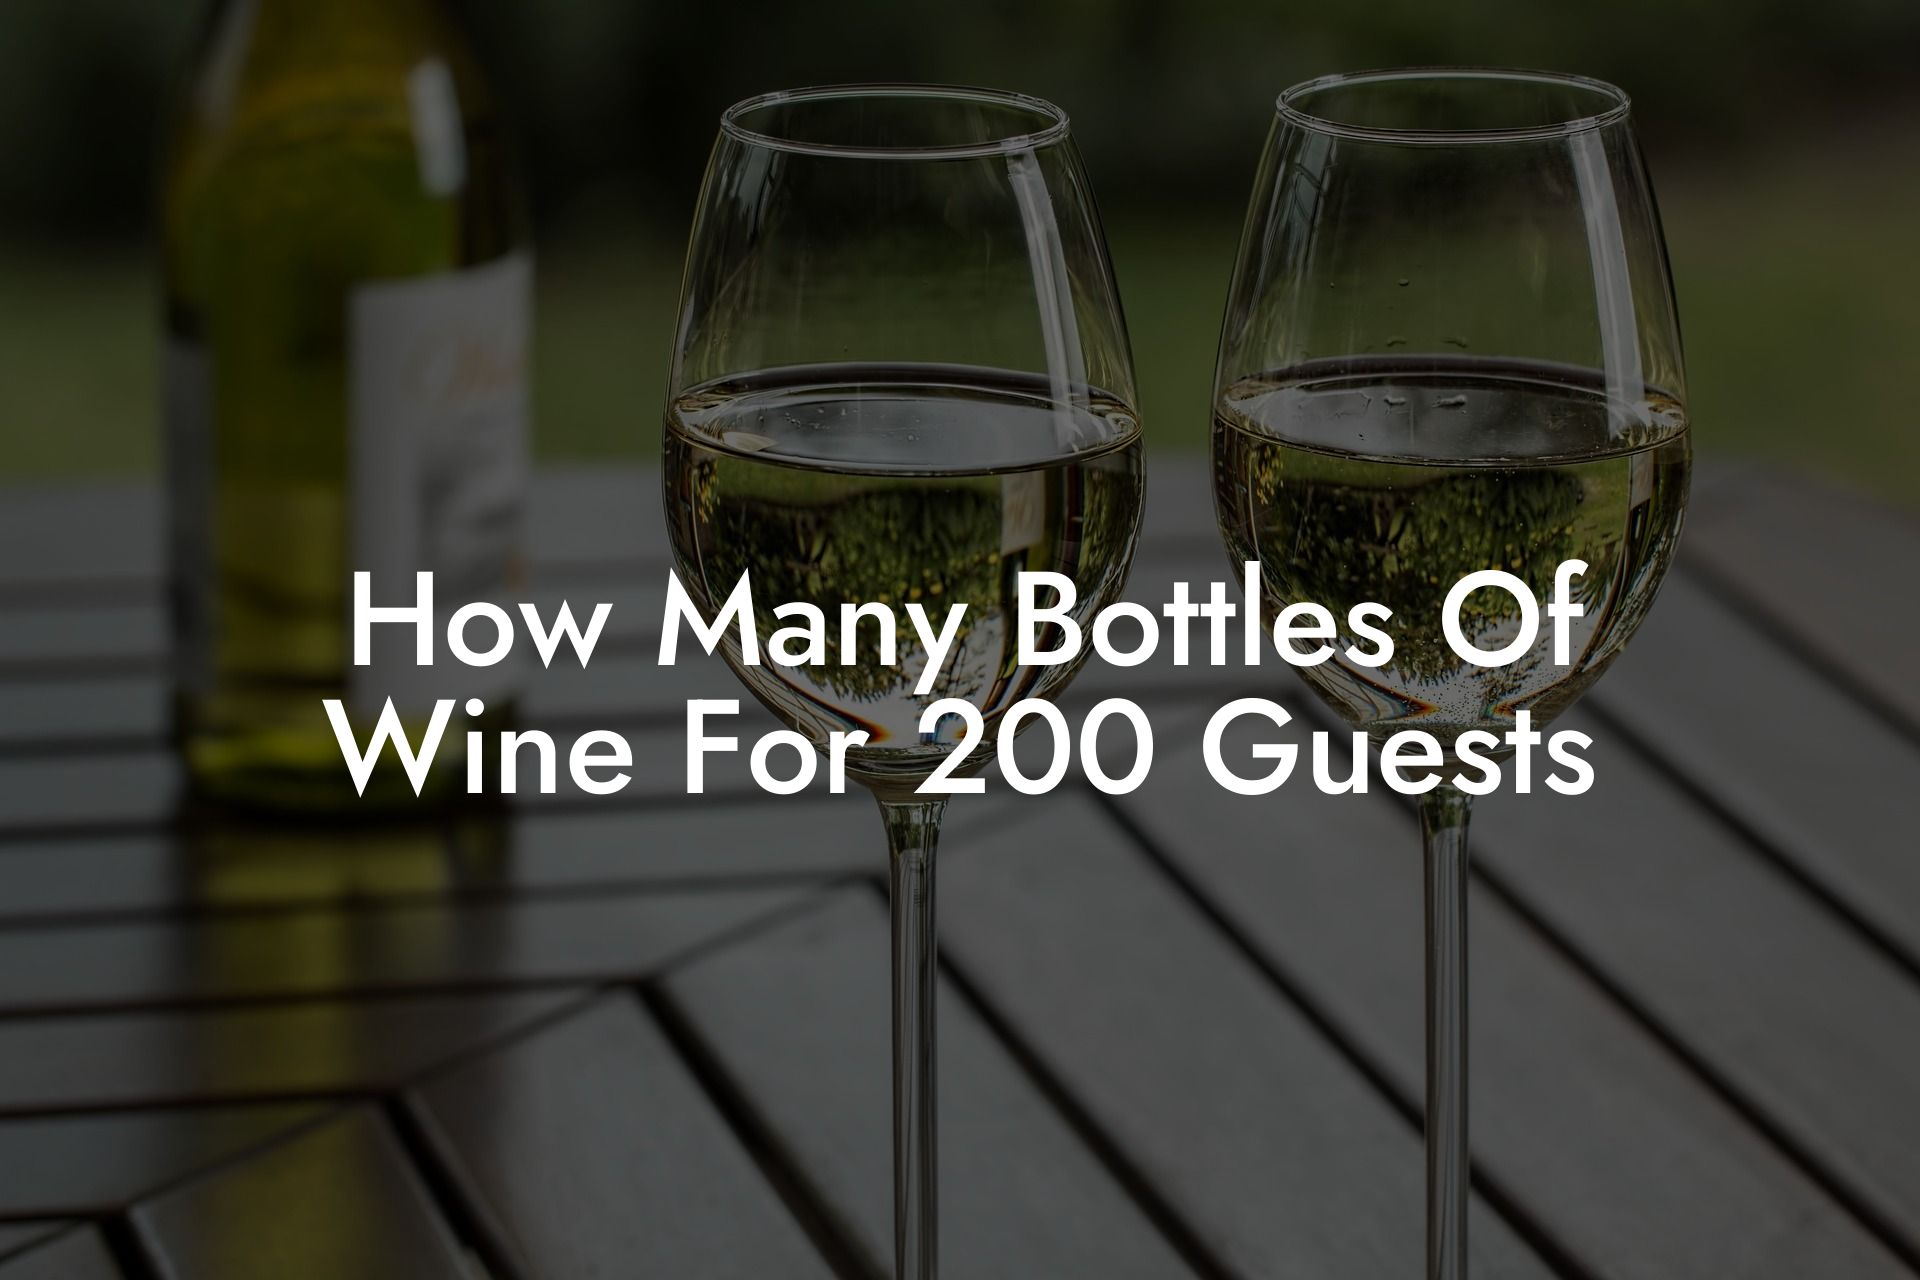 How Many Bottles Of Wine For 200 Guests